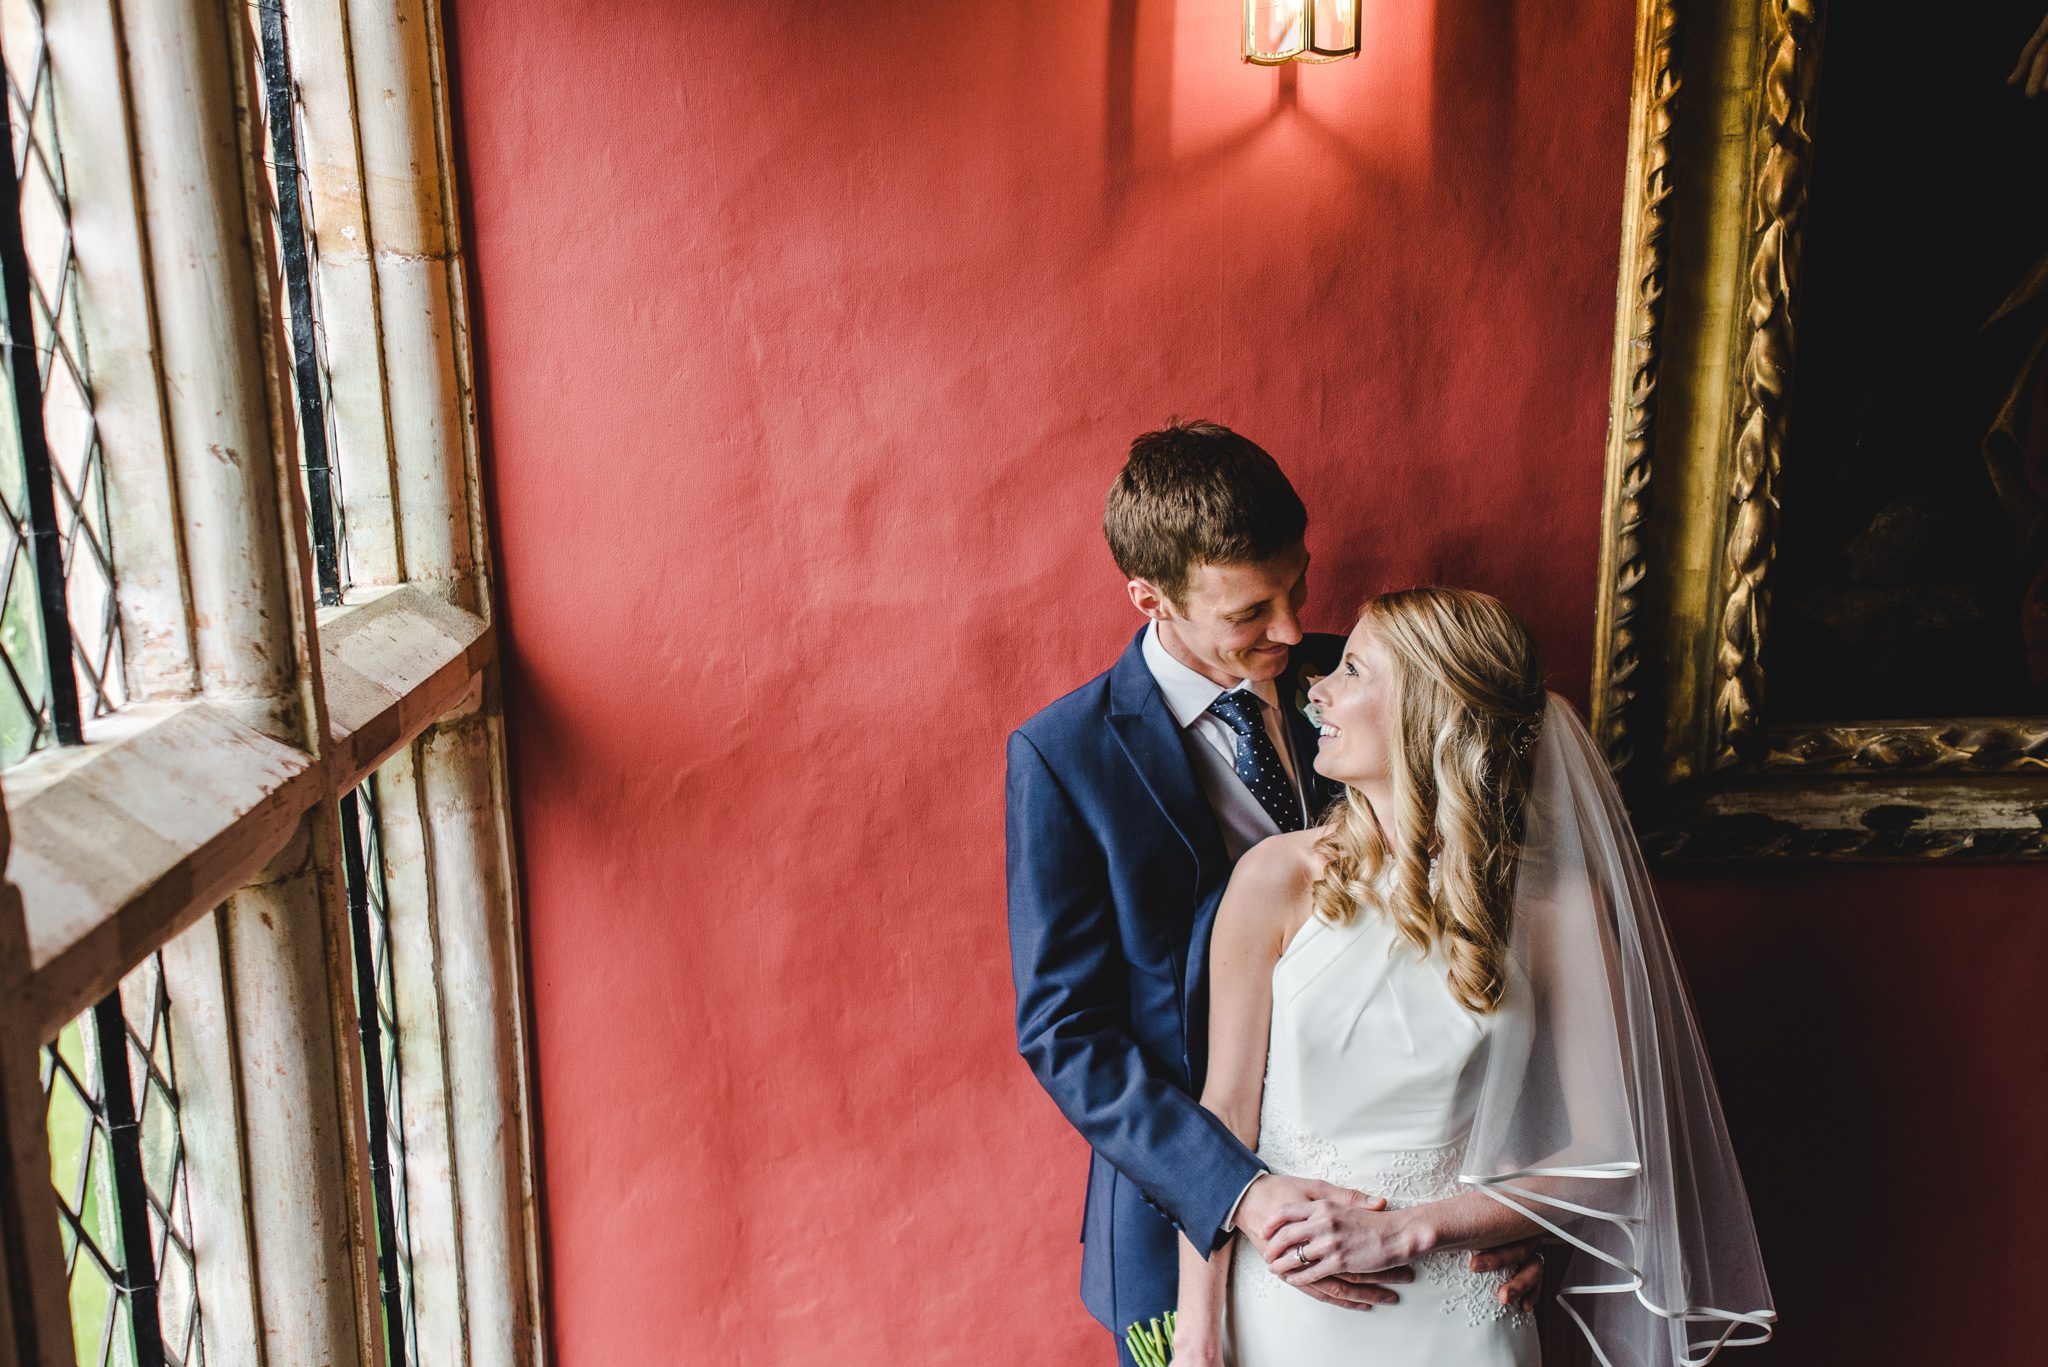 Bride and Groom wedding portraits by Bigeye Photography at Elmore Court